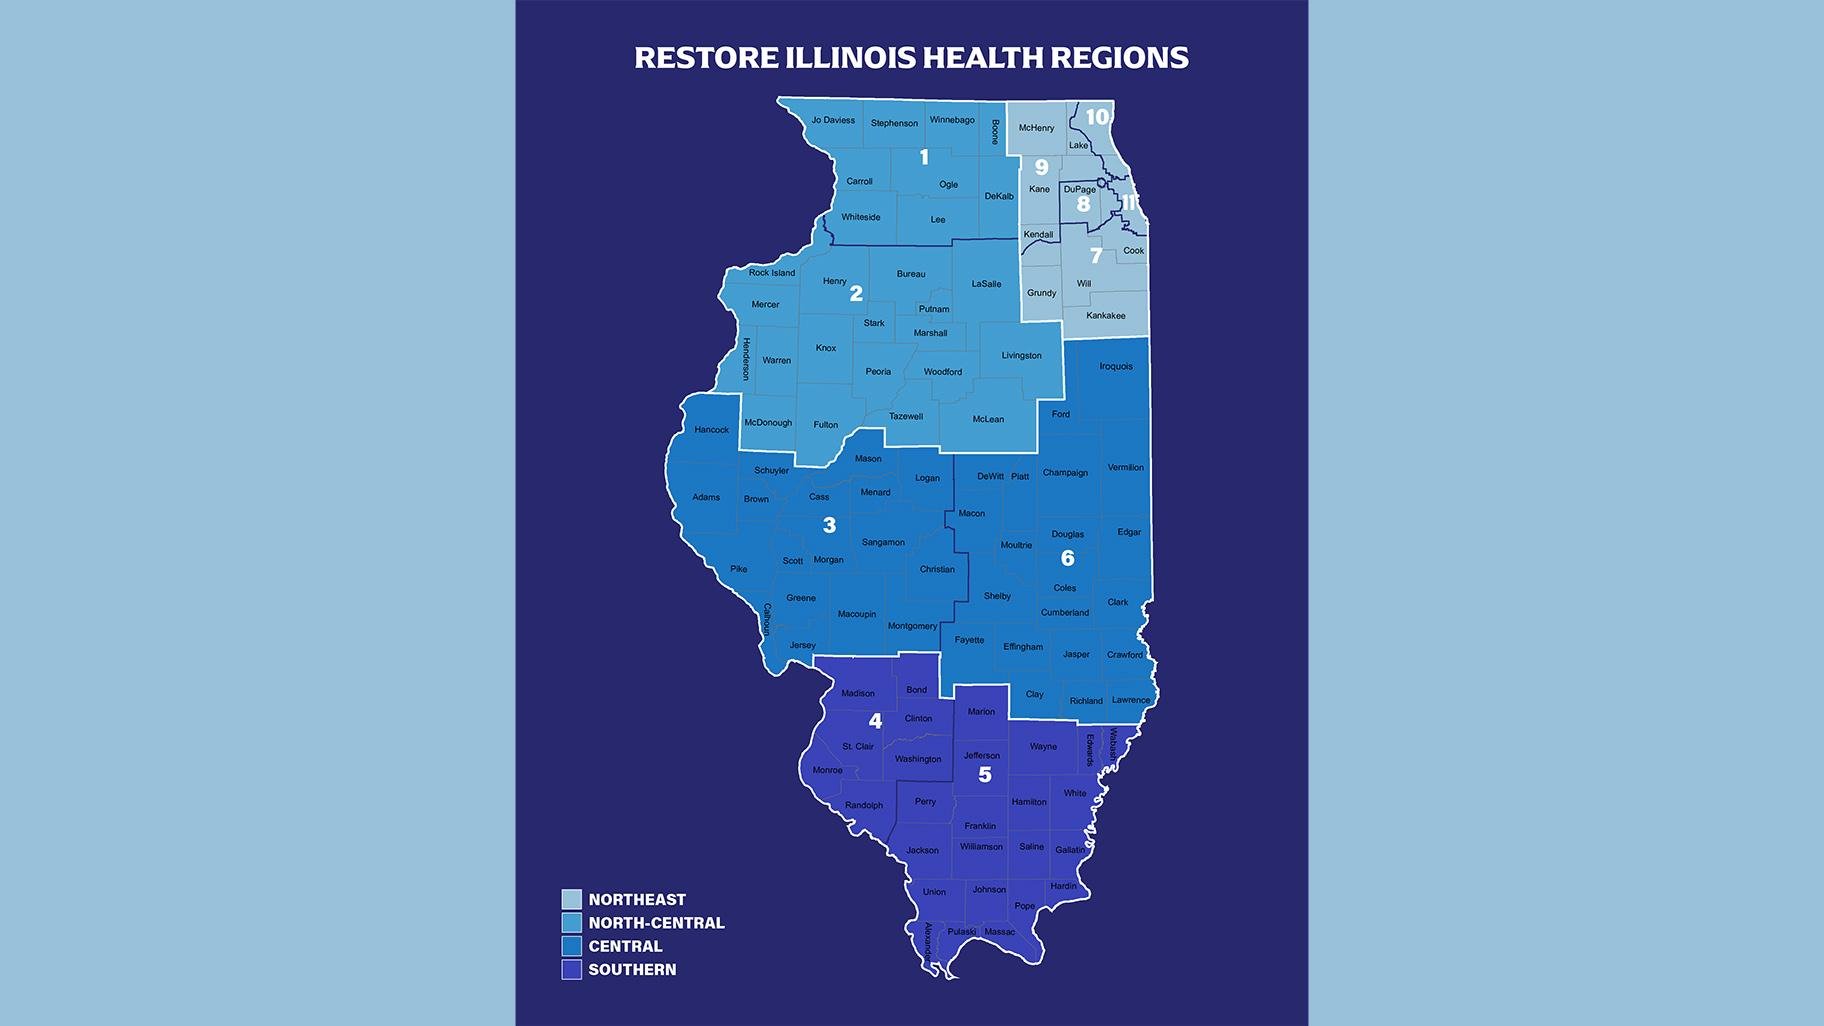 A page from Gov. J.B. Pritzker’s “Restore Illinois” plan. (Click to see larger version.)